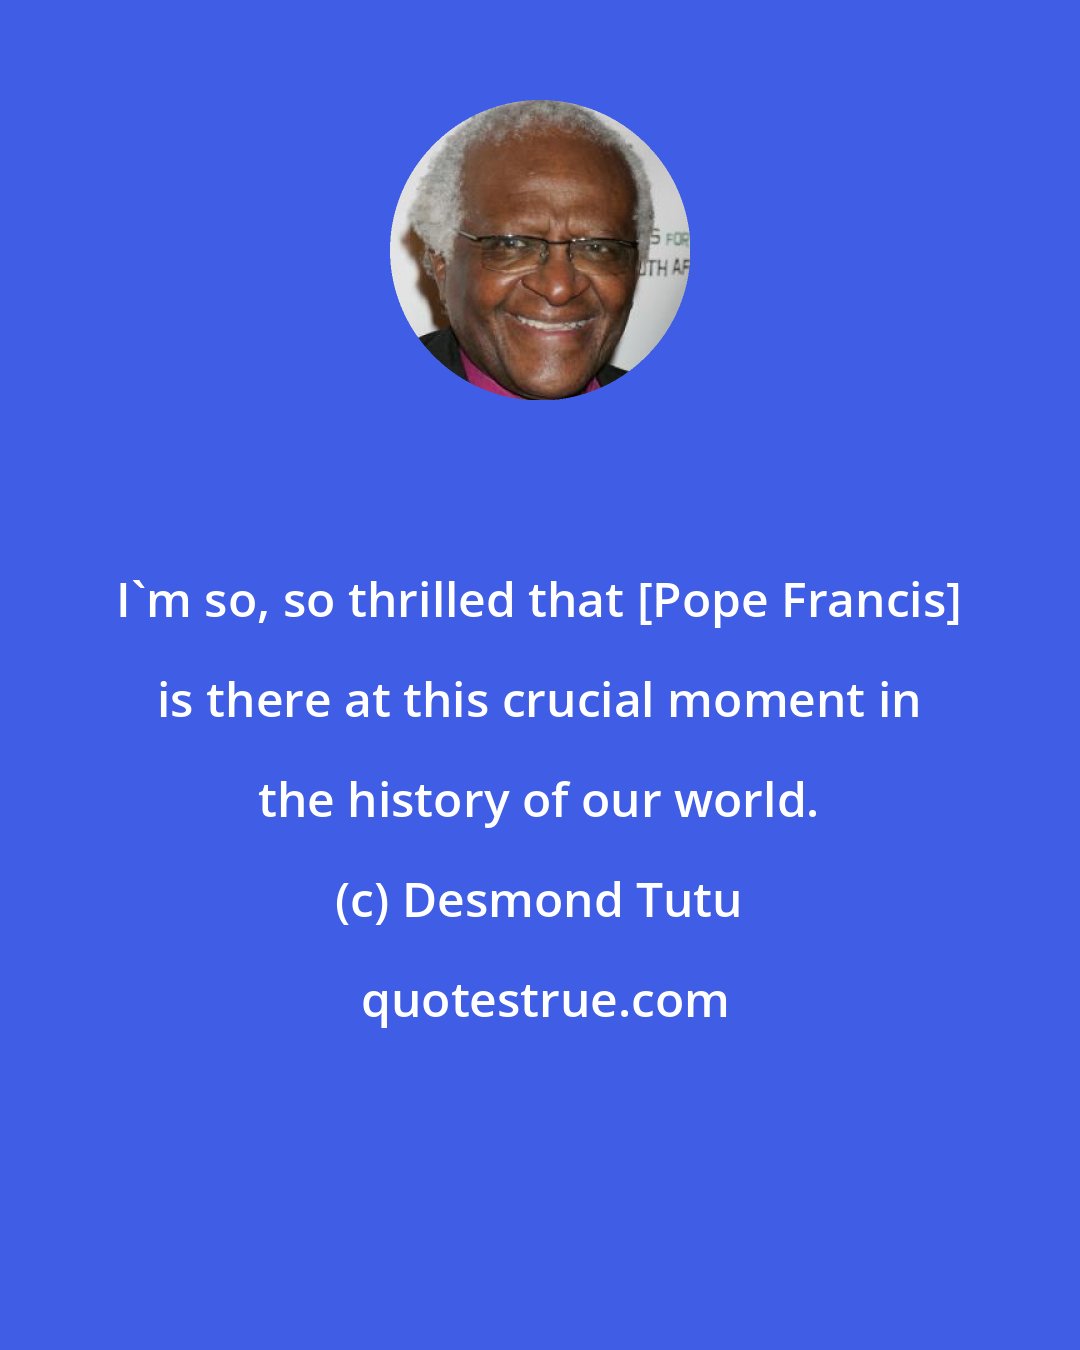 Desmond Tutu: I'm so, so thrilled that [Pope Francis] is there at this crucial moment in the history of our world.